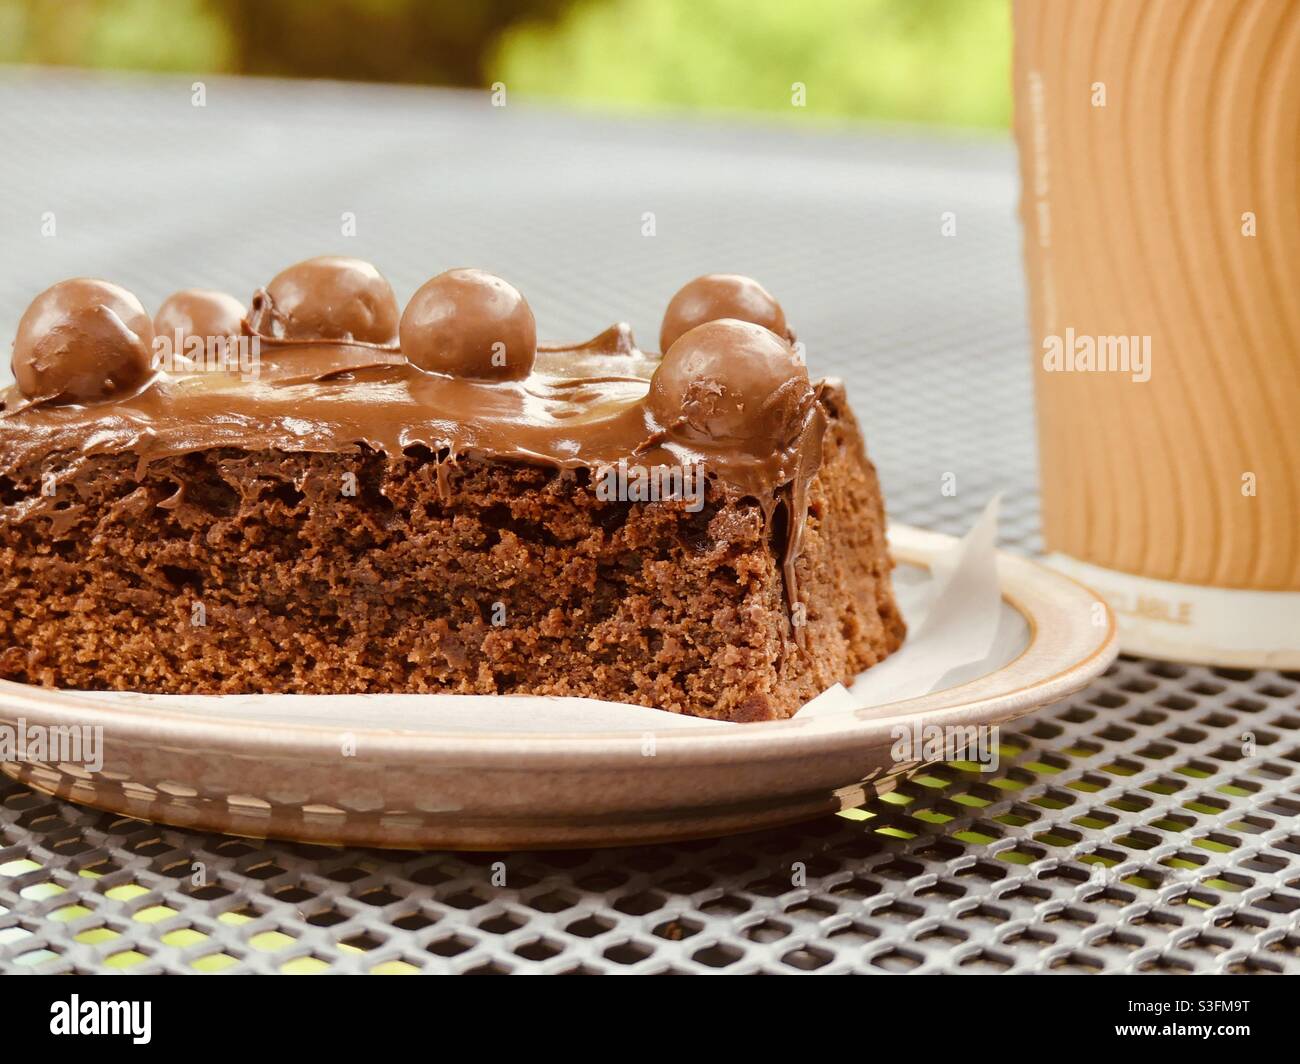 Time 4 a Chocolate Brownie ? Cake and a coffee ☕️ break in the sunshine Stock Photo